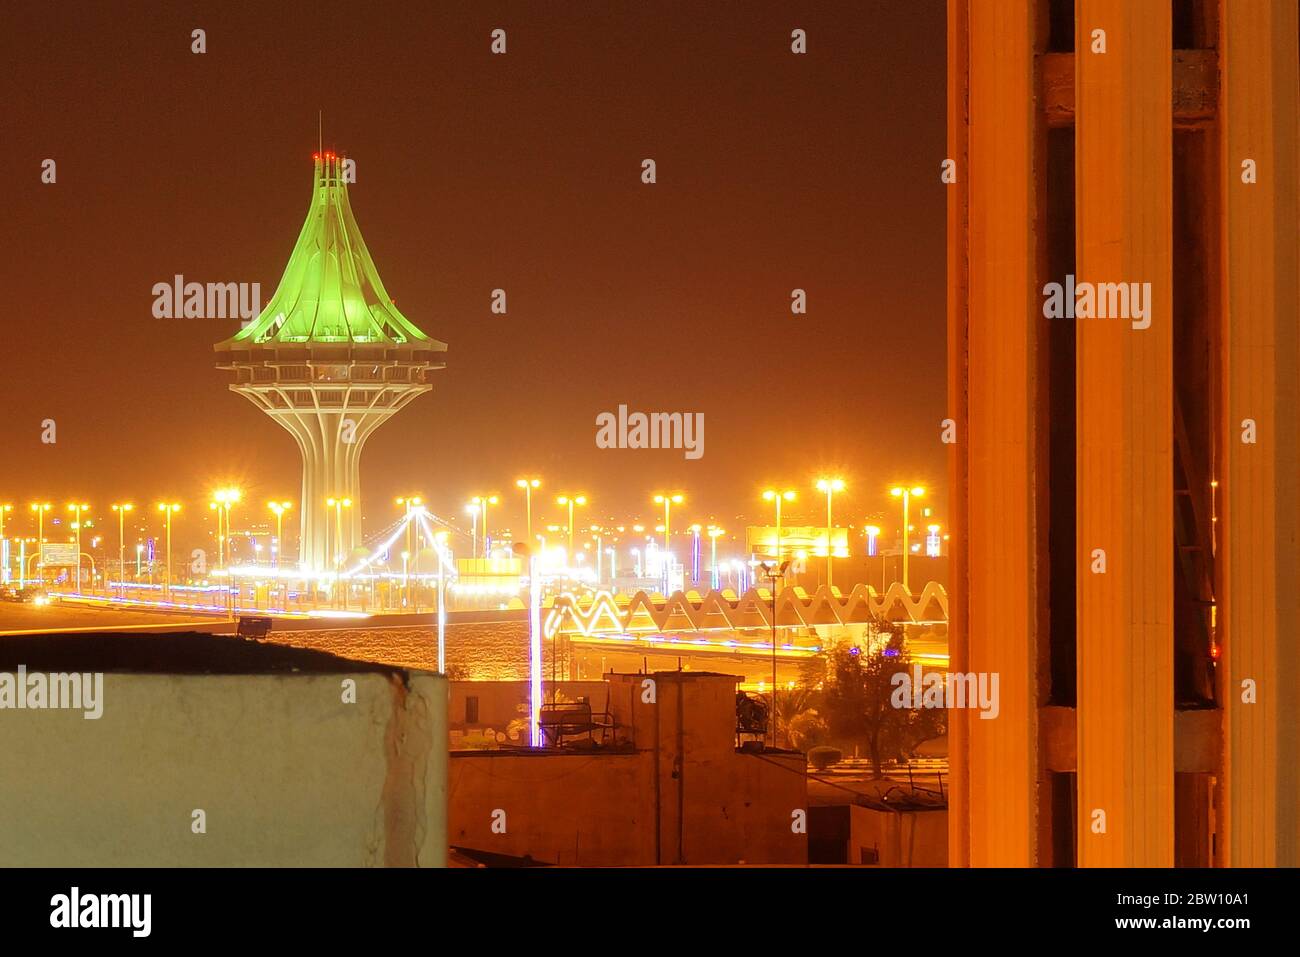 Tower and lights at night in Al Kharj, Kingdom of Saudi Arabia, Middle East. Photo taken on July 26, 2015. Stock Photo